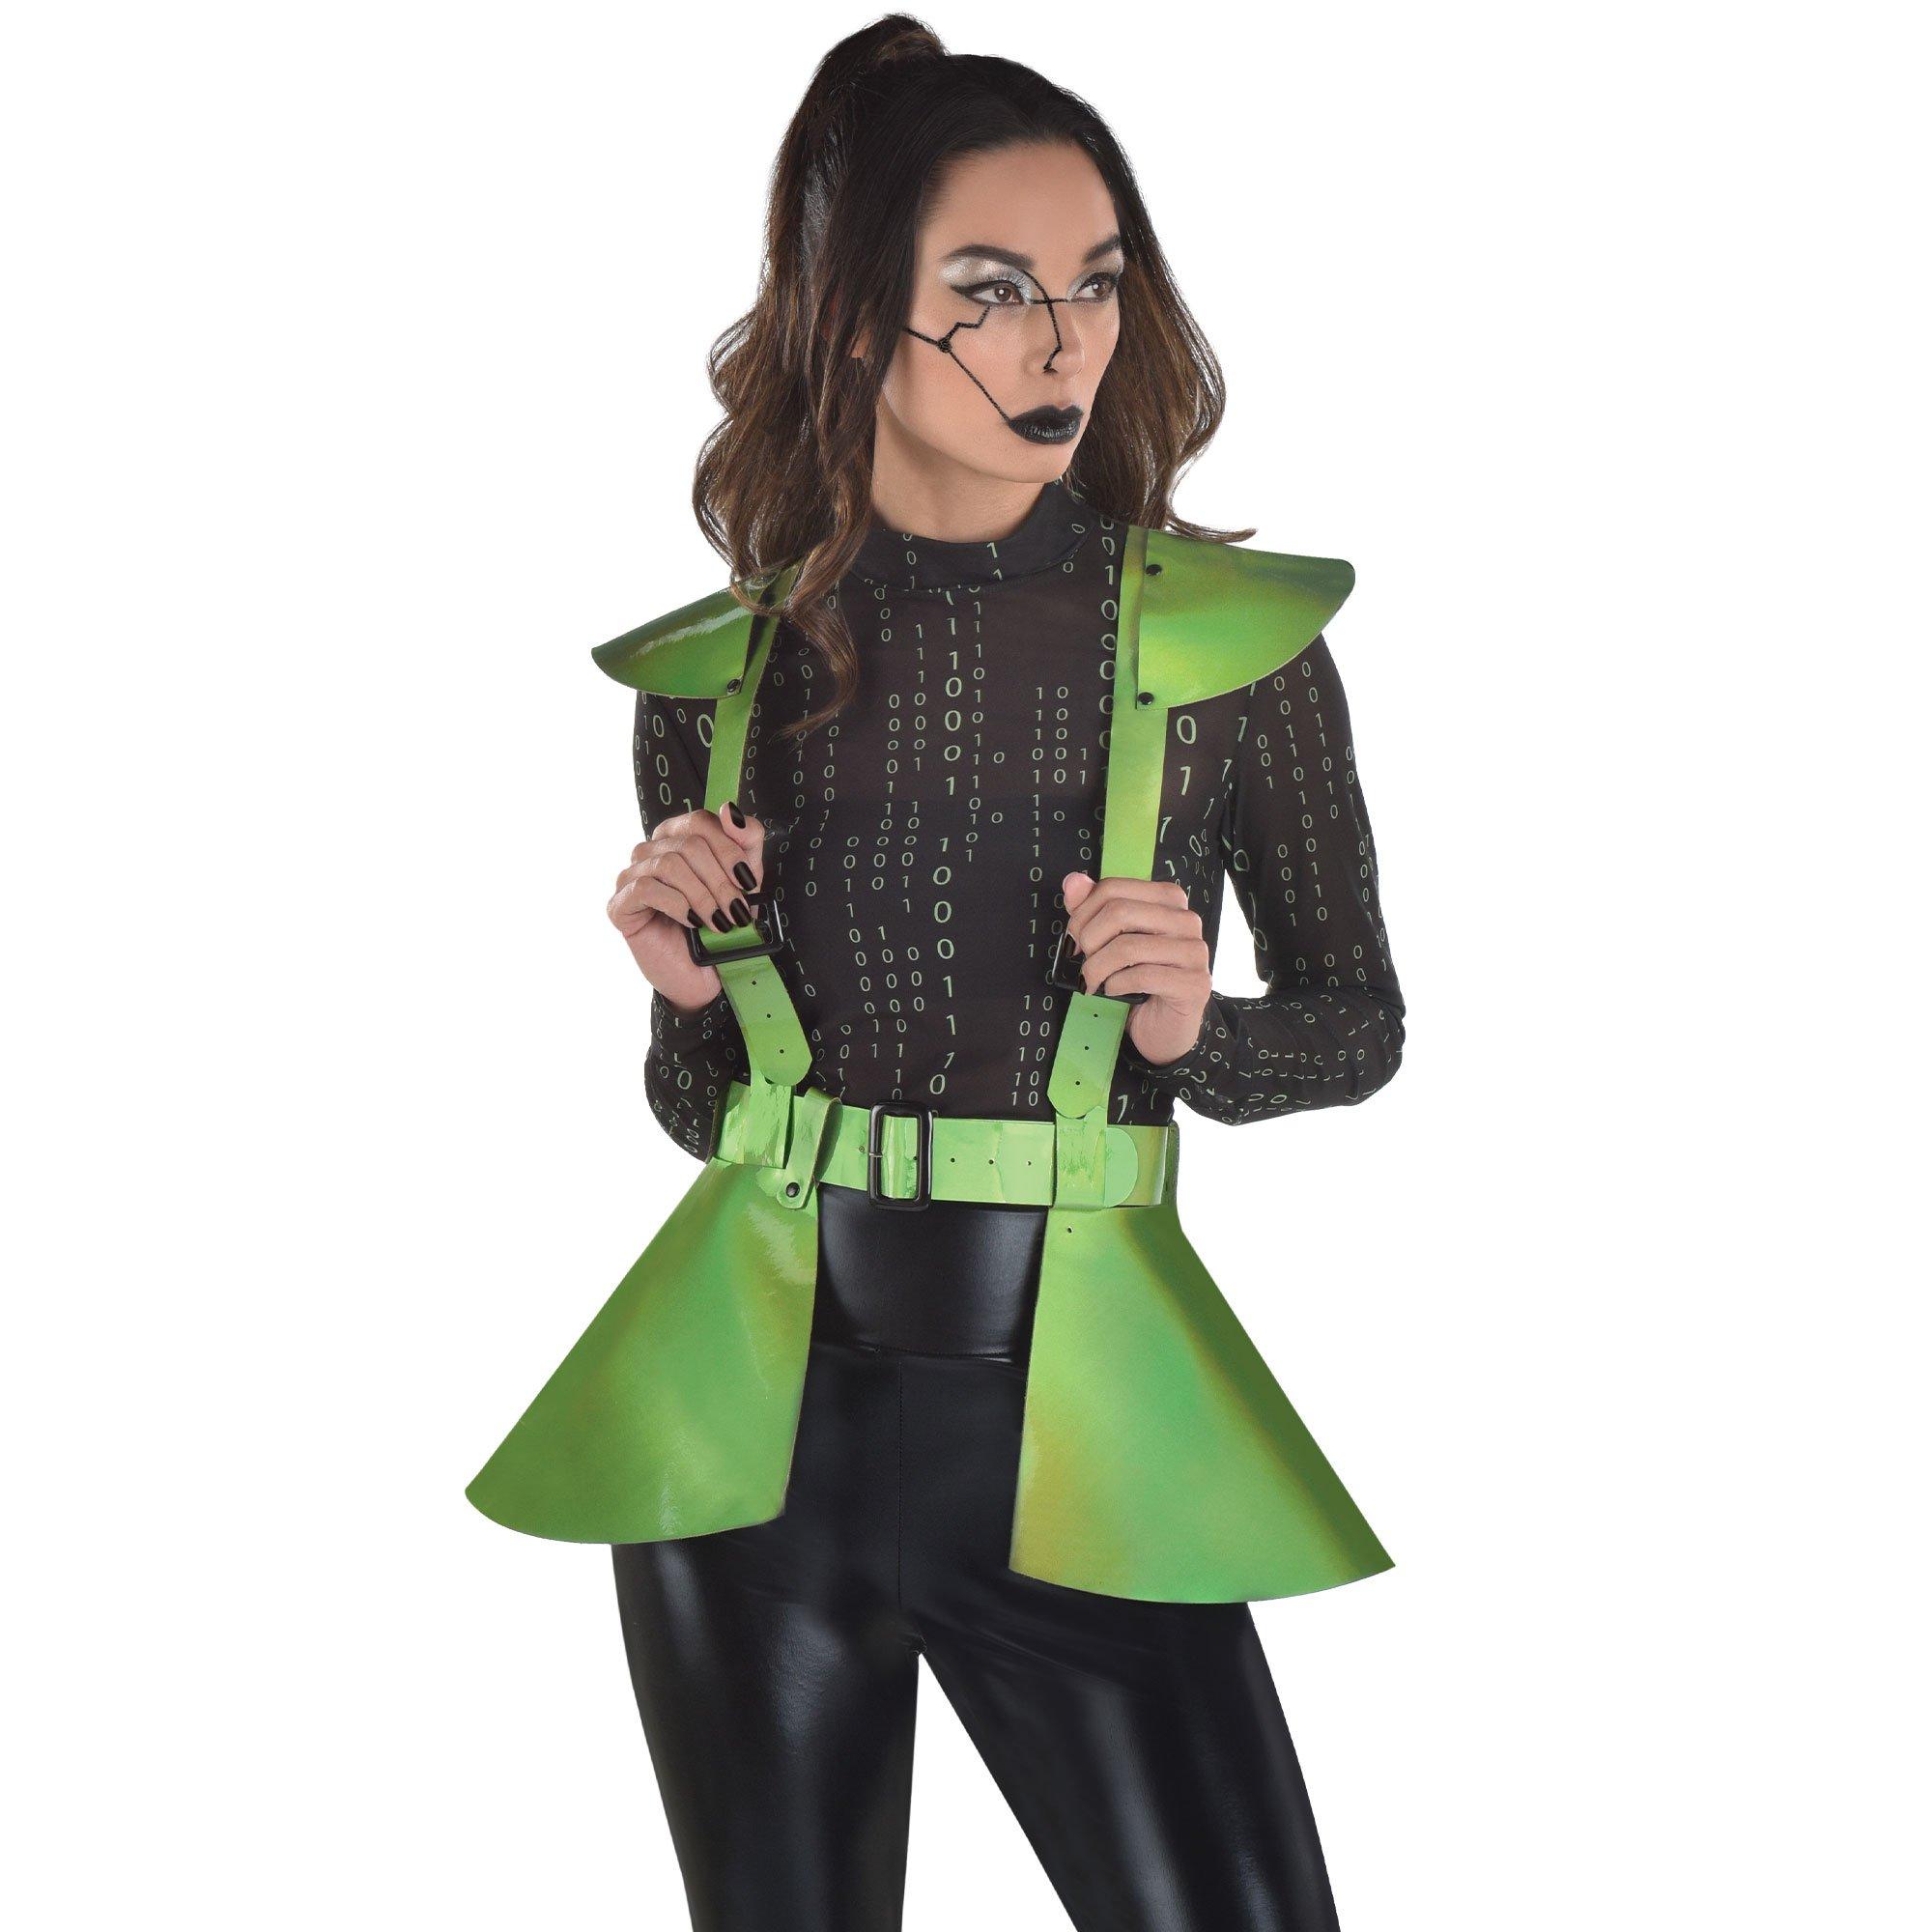 Shop the Look: Cyberpunk Costume Collection | Party City